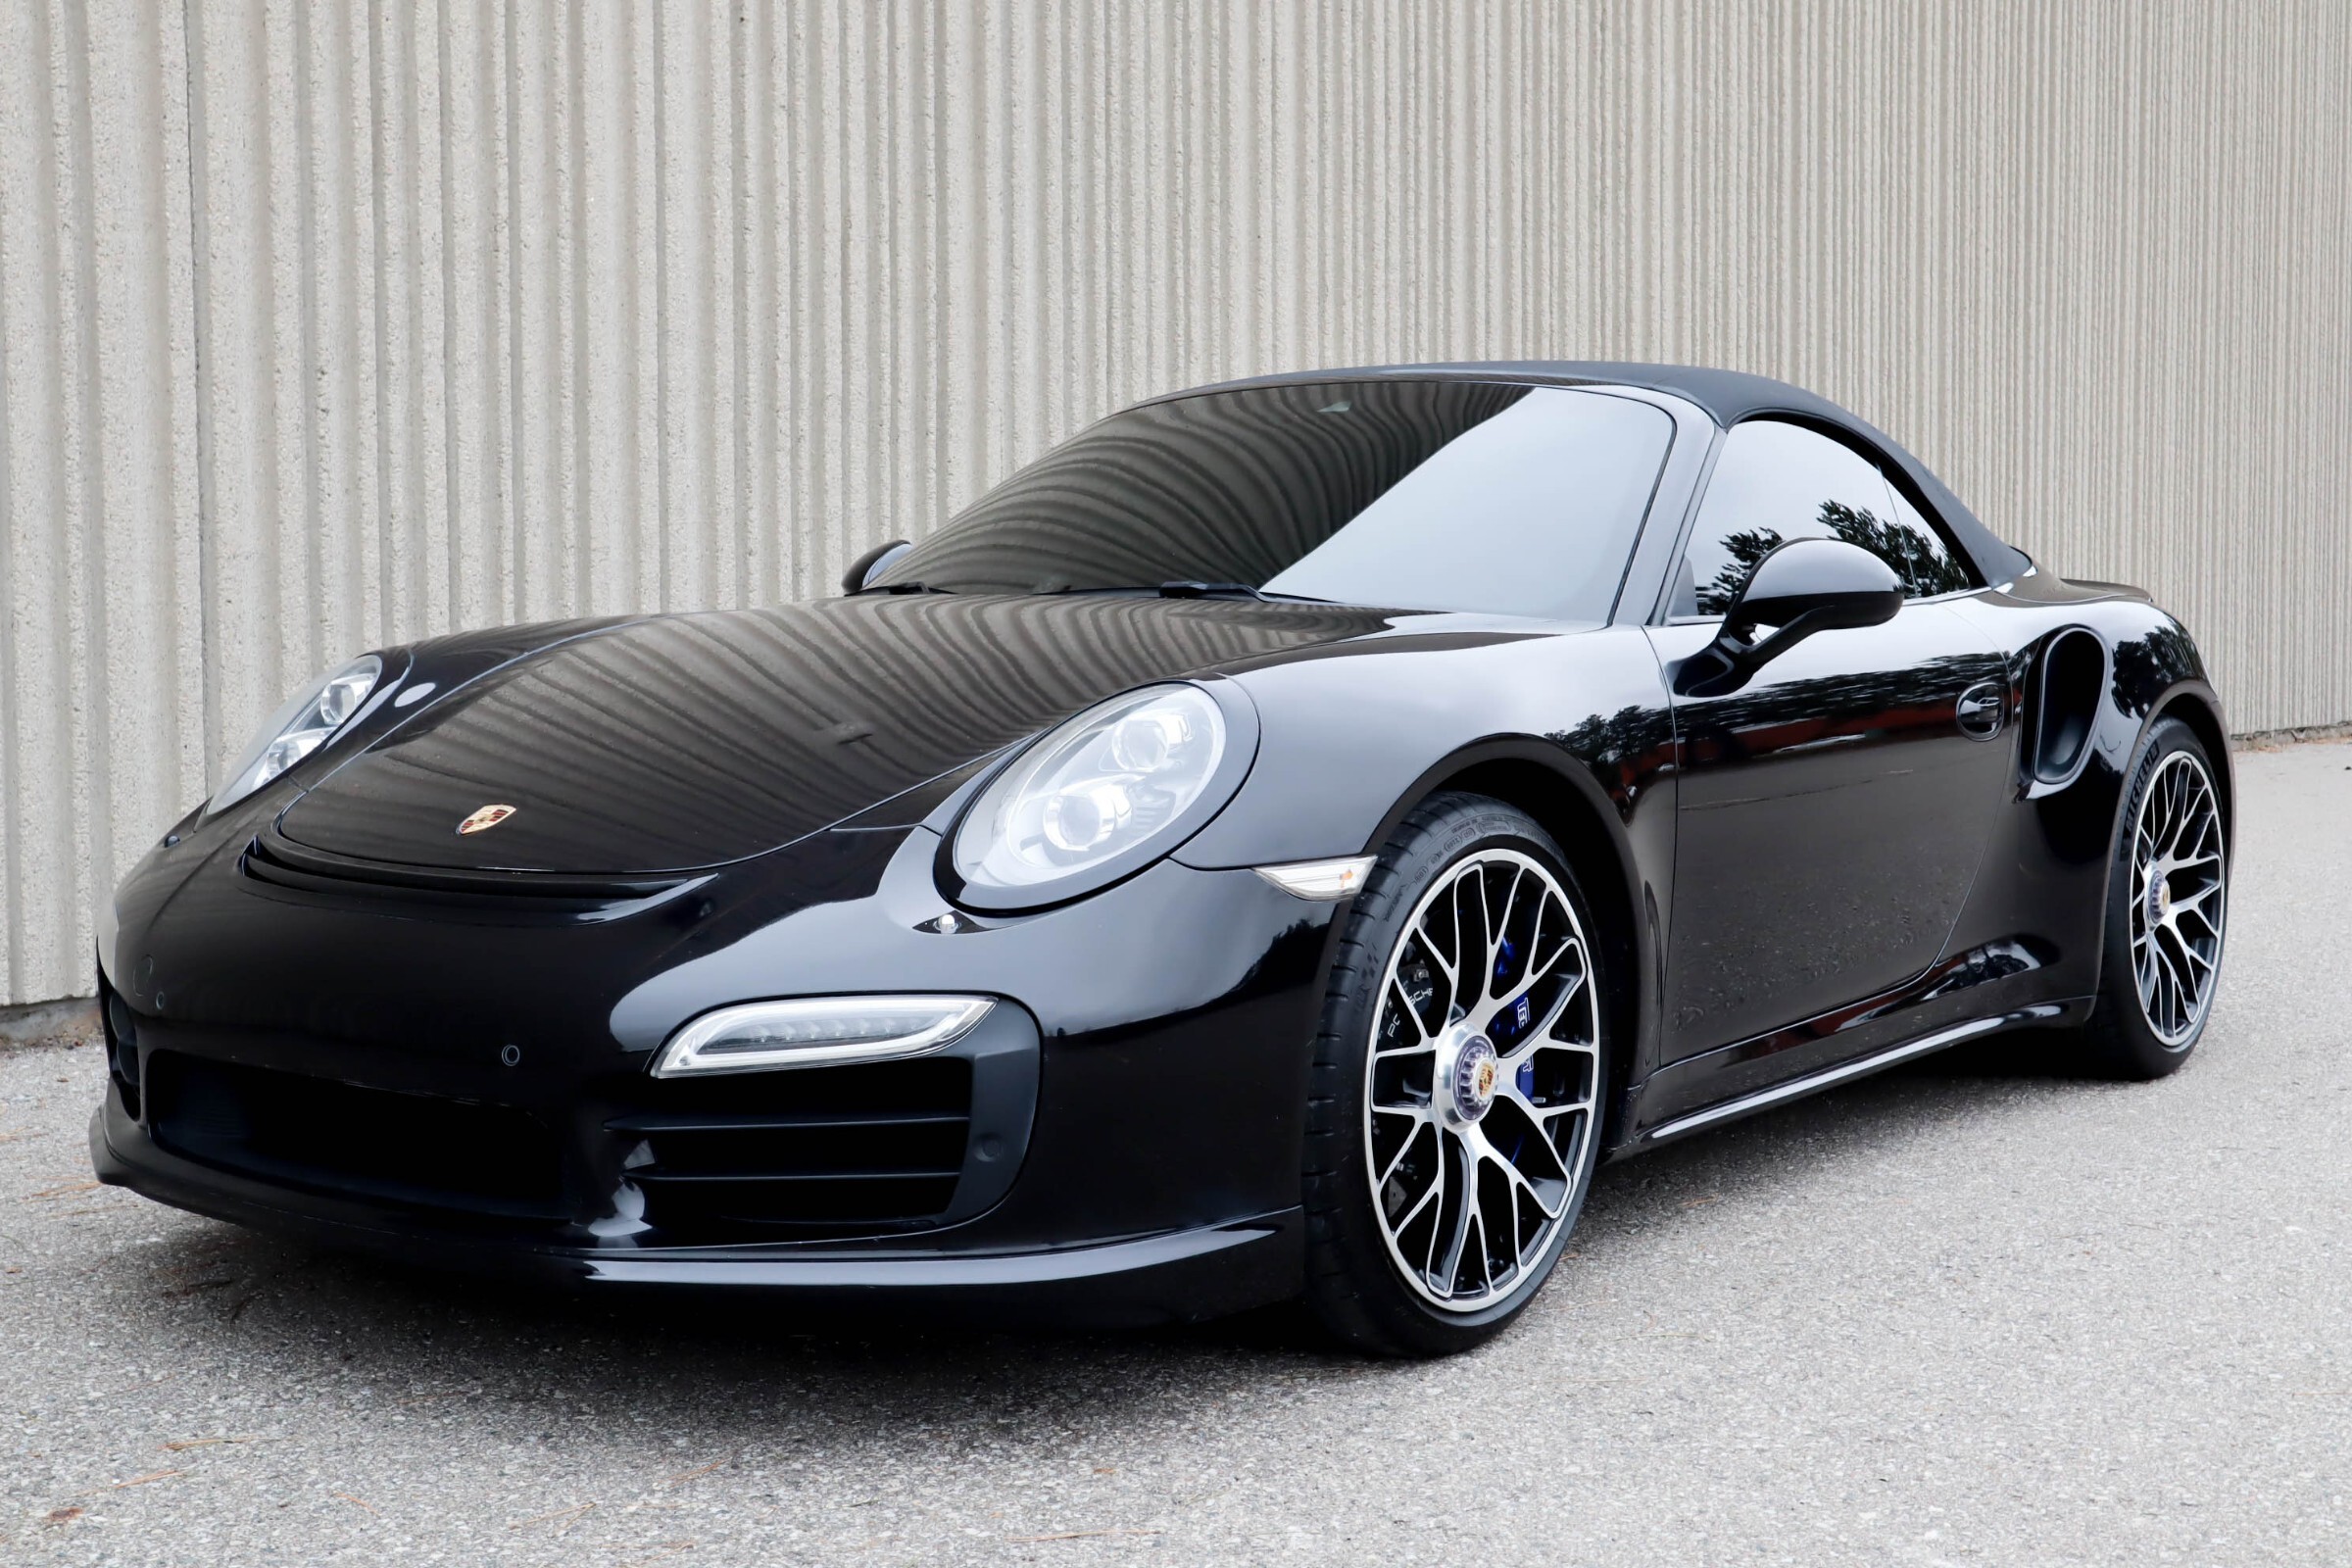 2014 Porsche 911 Turbo S | Cab | Loaded | CleanCarfax!